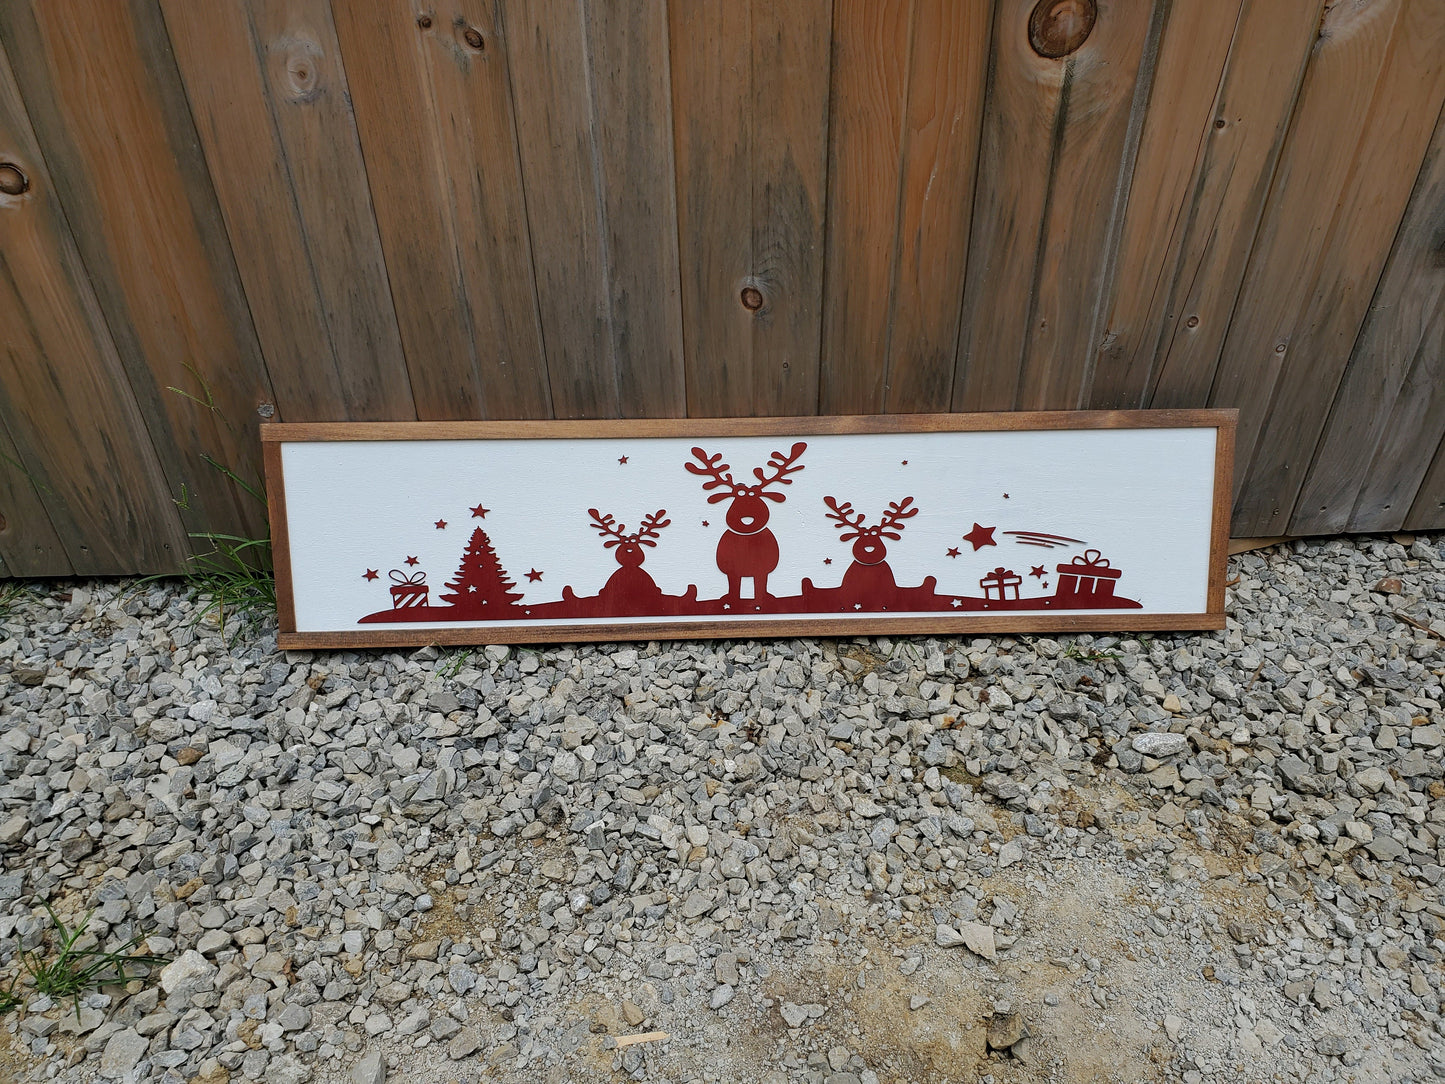 Christmas Scenery, Sign, Reindeer, Deer, Tree, Winter, Star, Red, Presents, Large Holiday Decor, Over Sized, 3D Cut outs